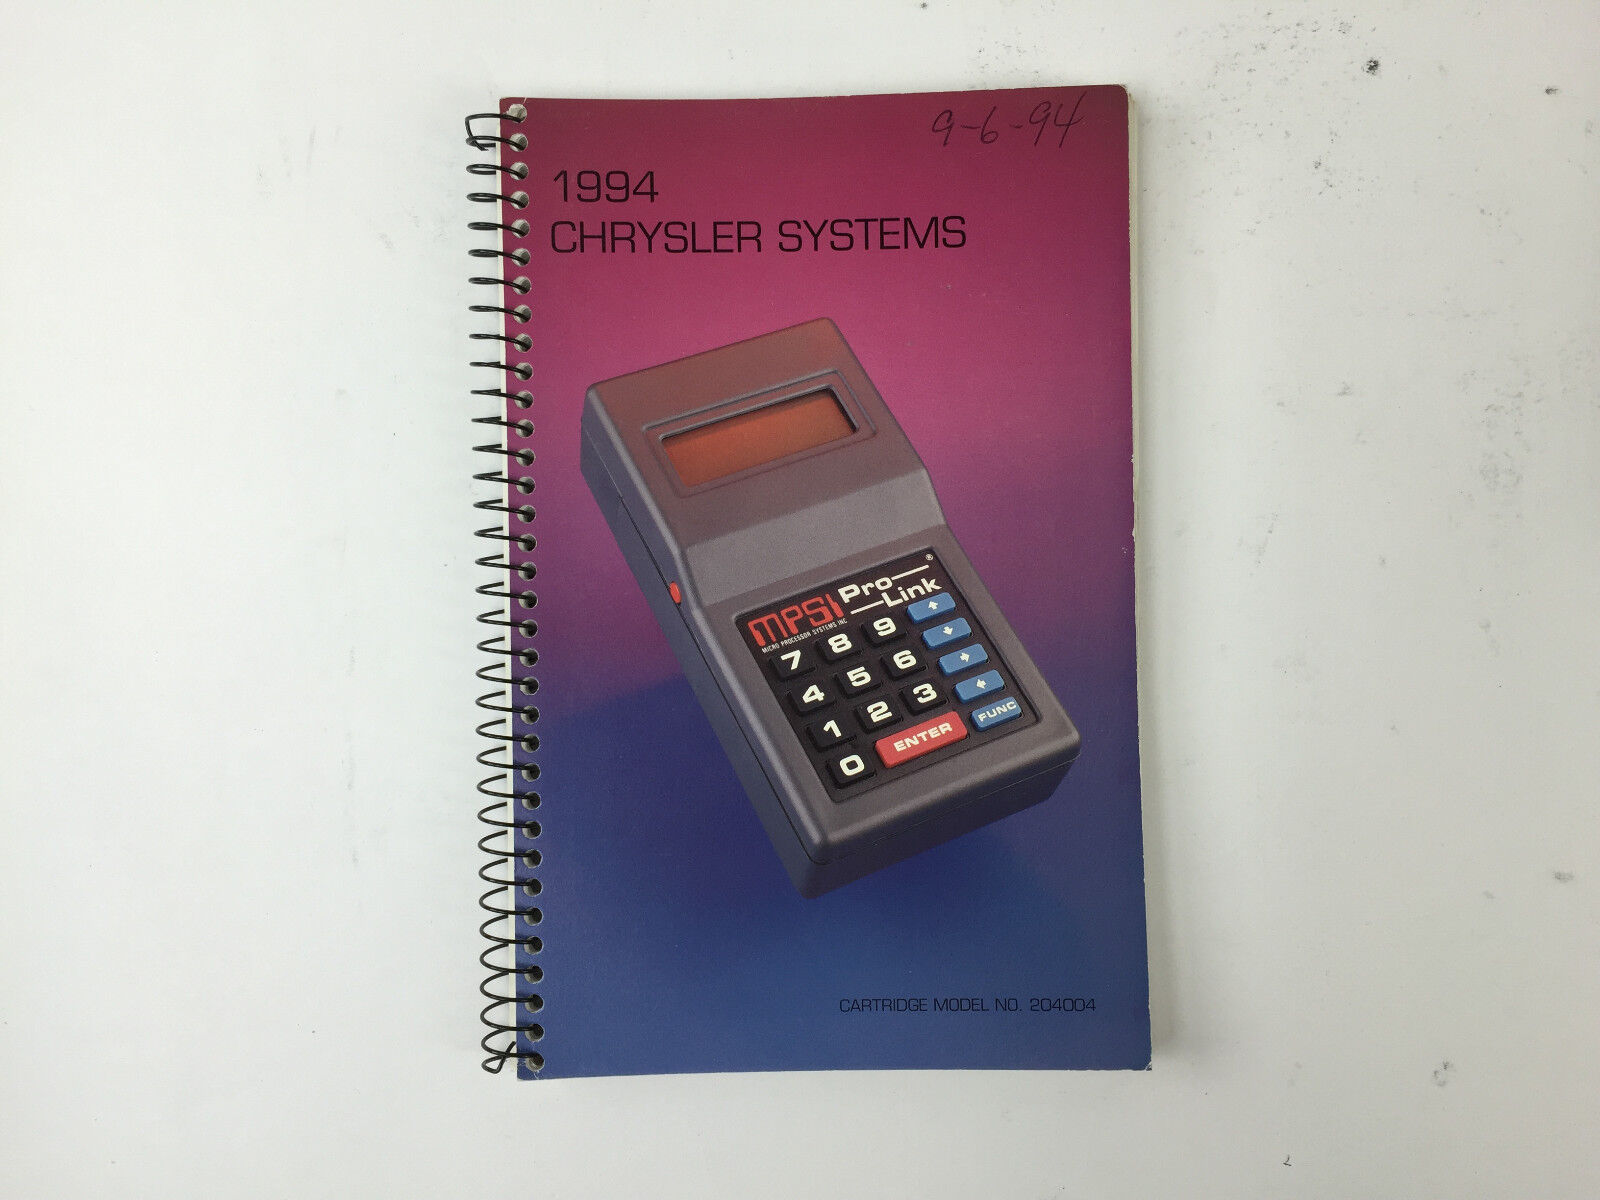 MPSI Chrysler SCI and CCD System Cartridge Model No. 204004